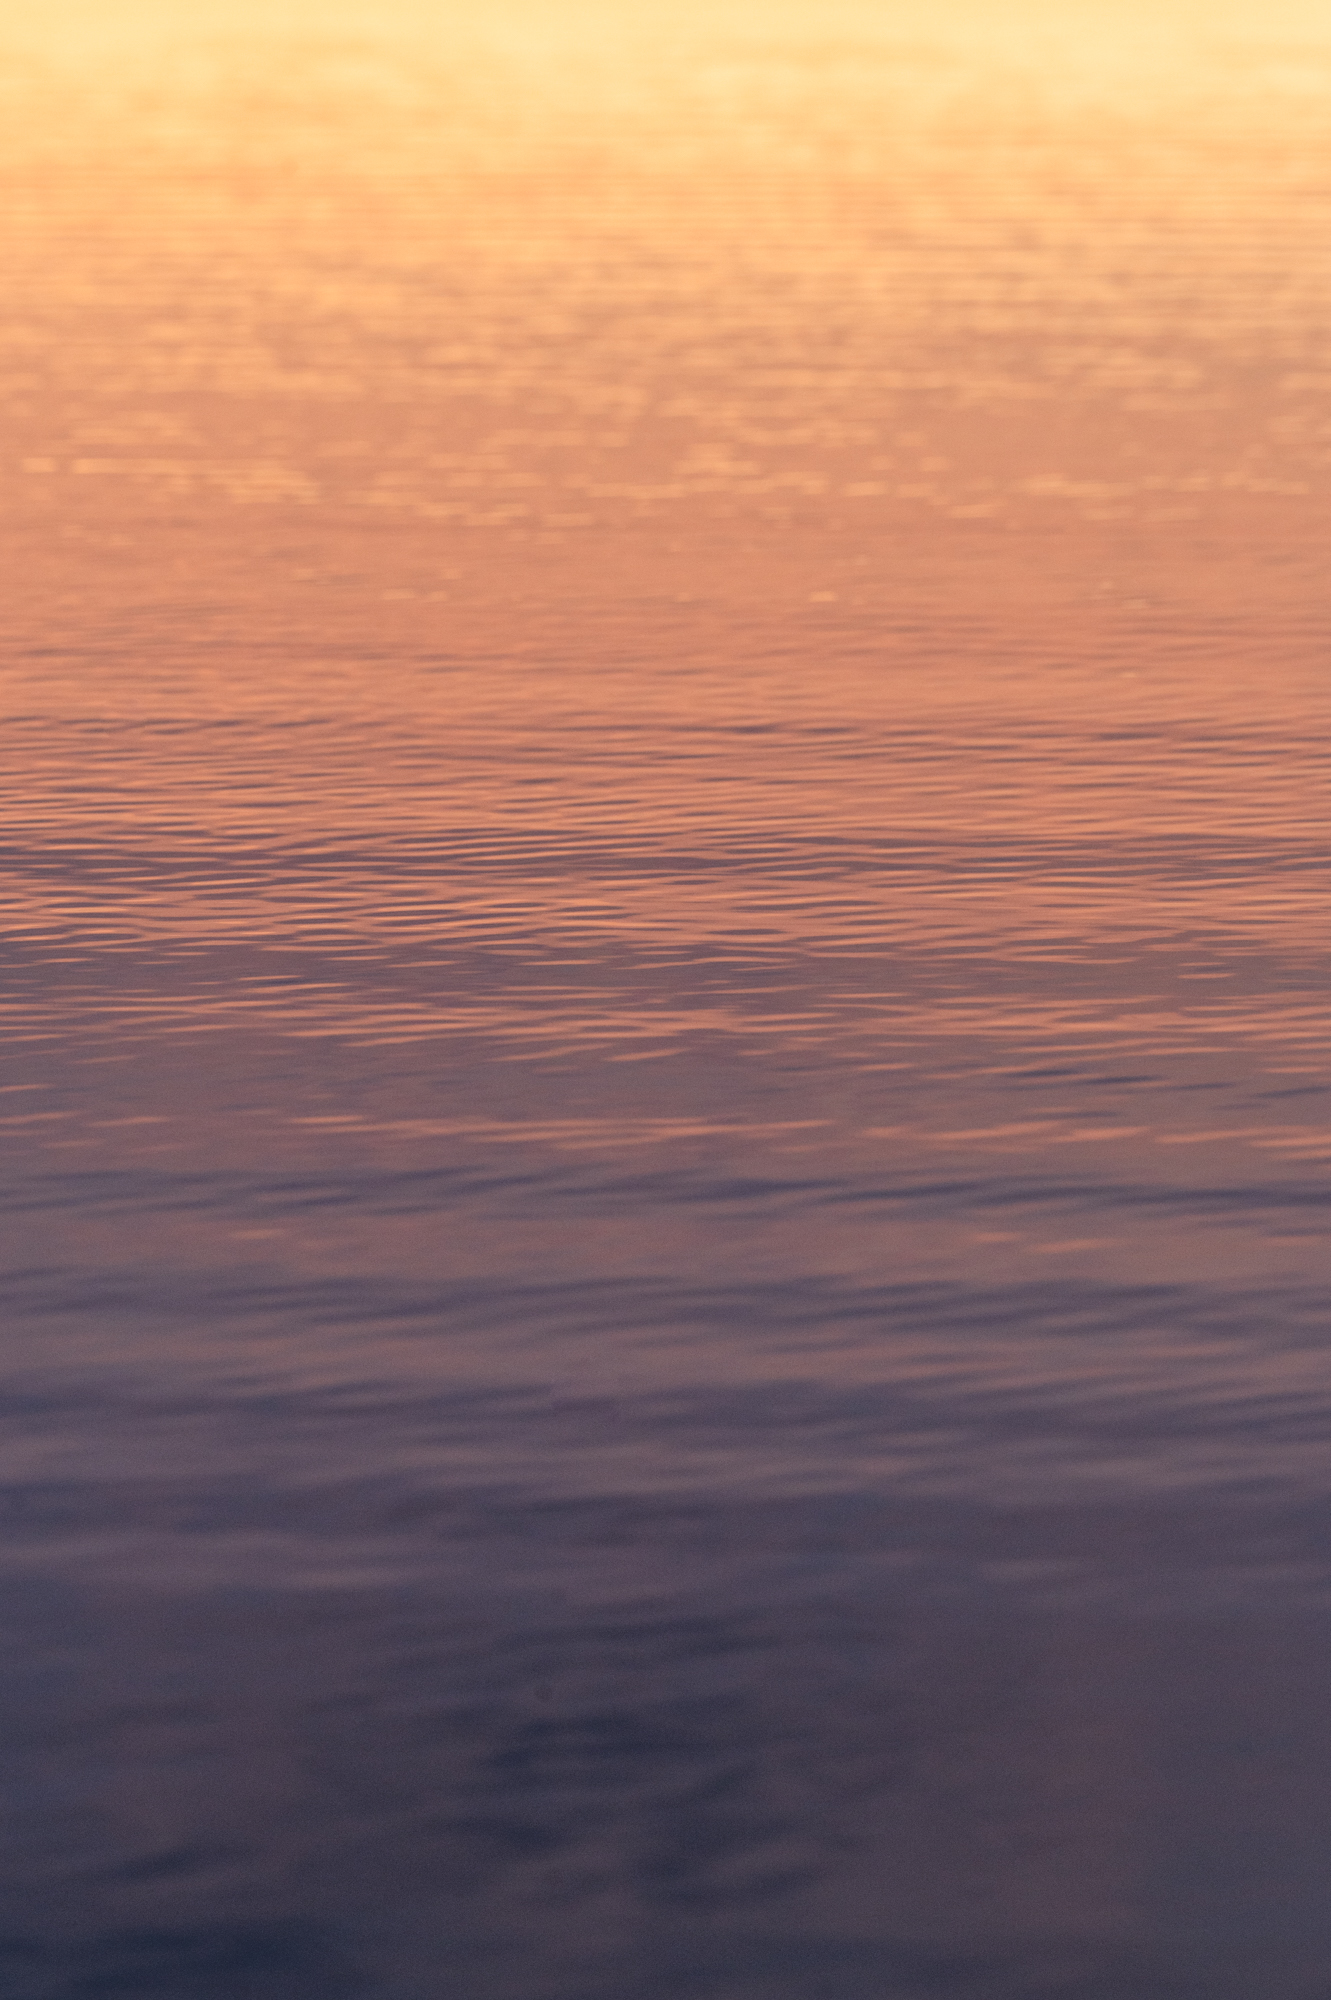 A warm-to-cold gradient across the water as the sun sets